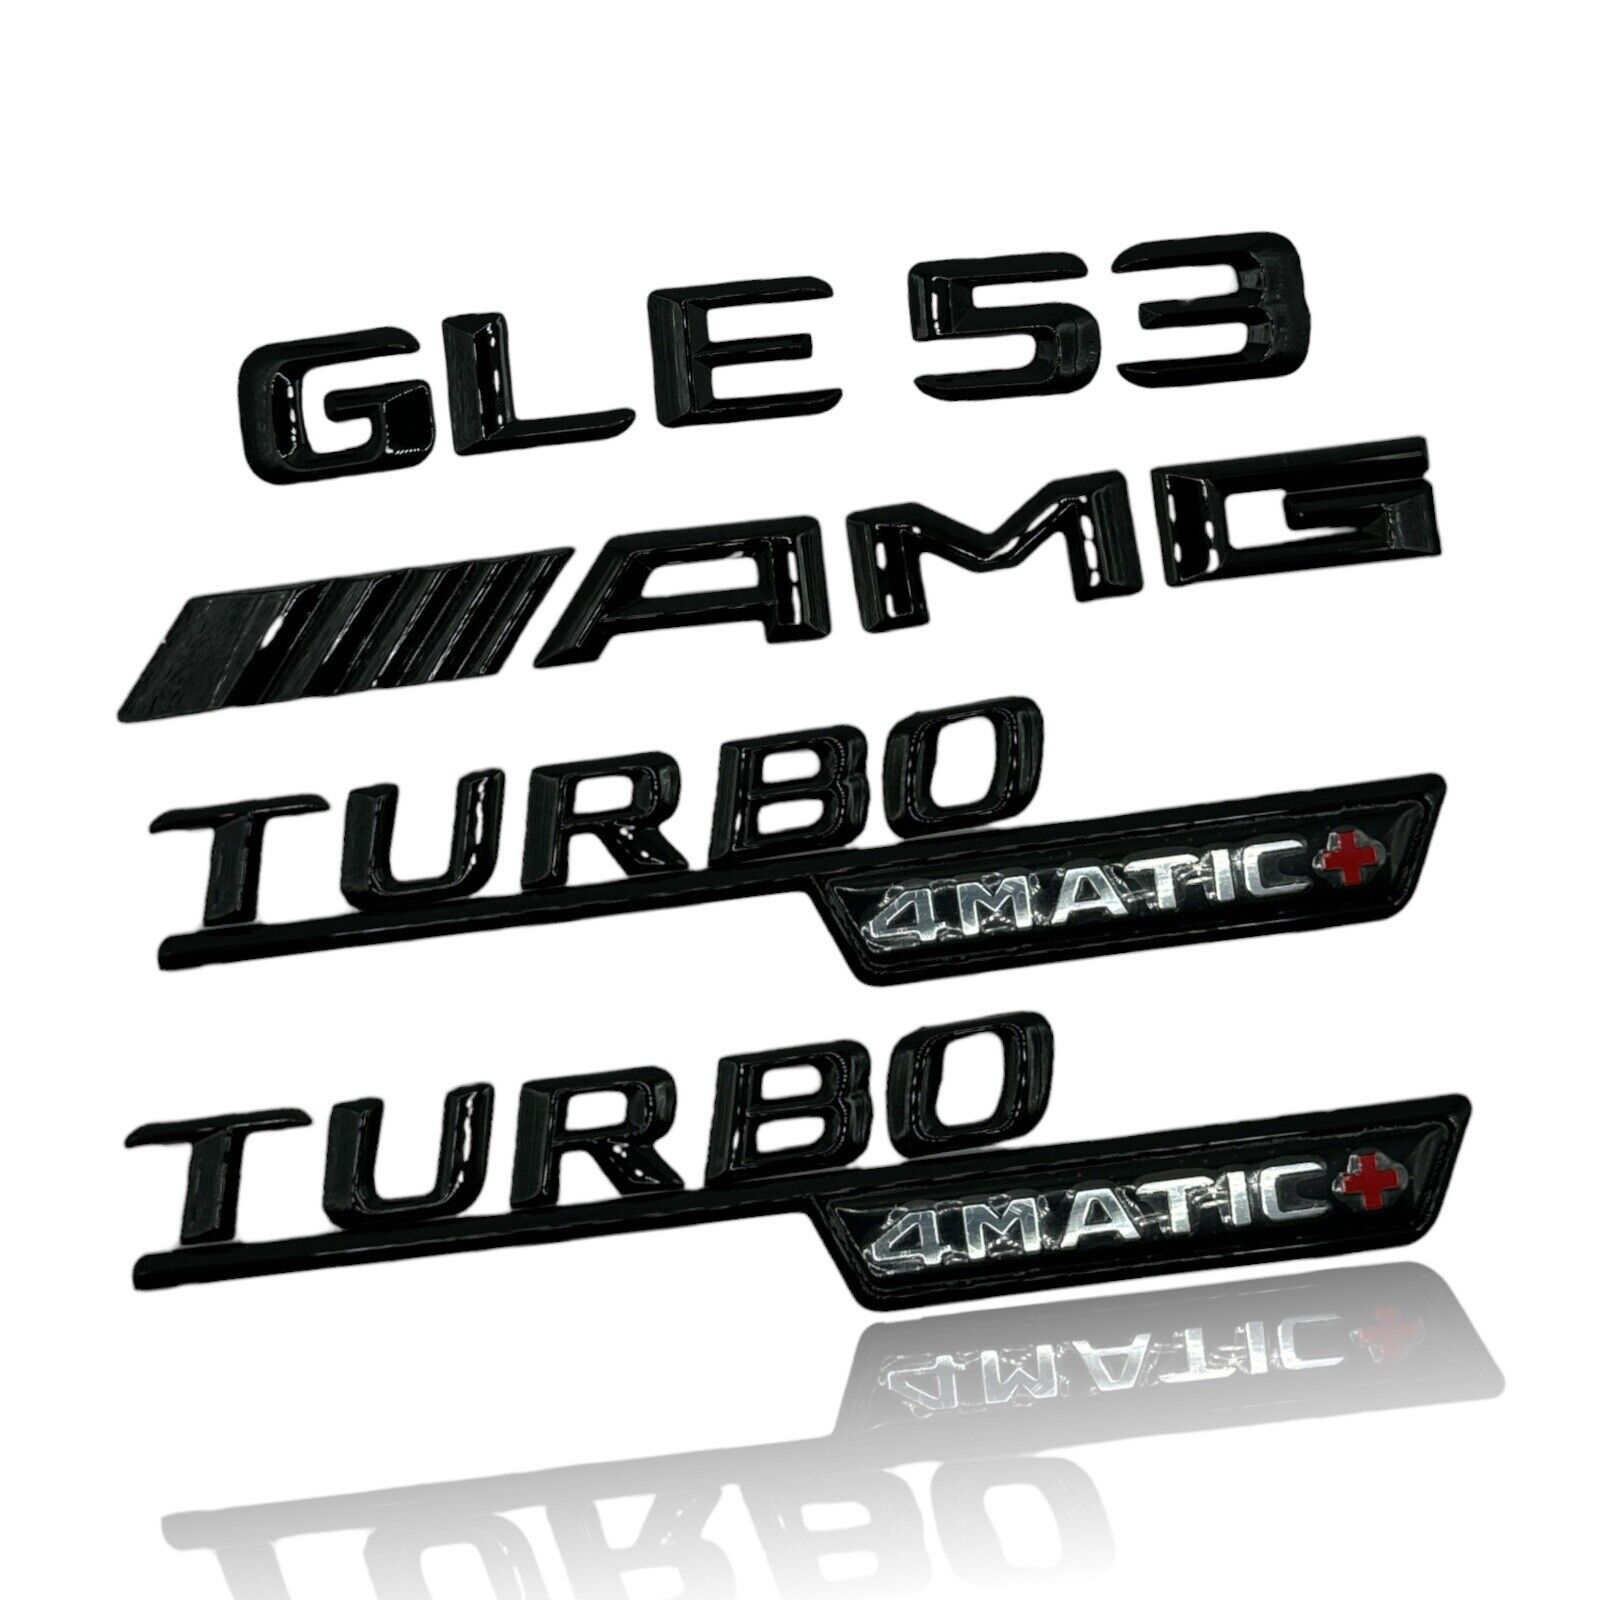 GLE53 COUPE AMG TURBO 4MATIC+ Rear Emblem glossy Black Badge Set for Mercedes